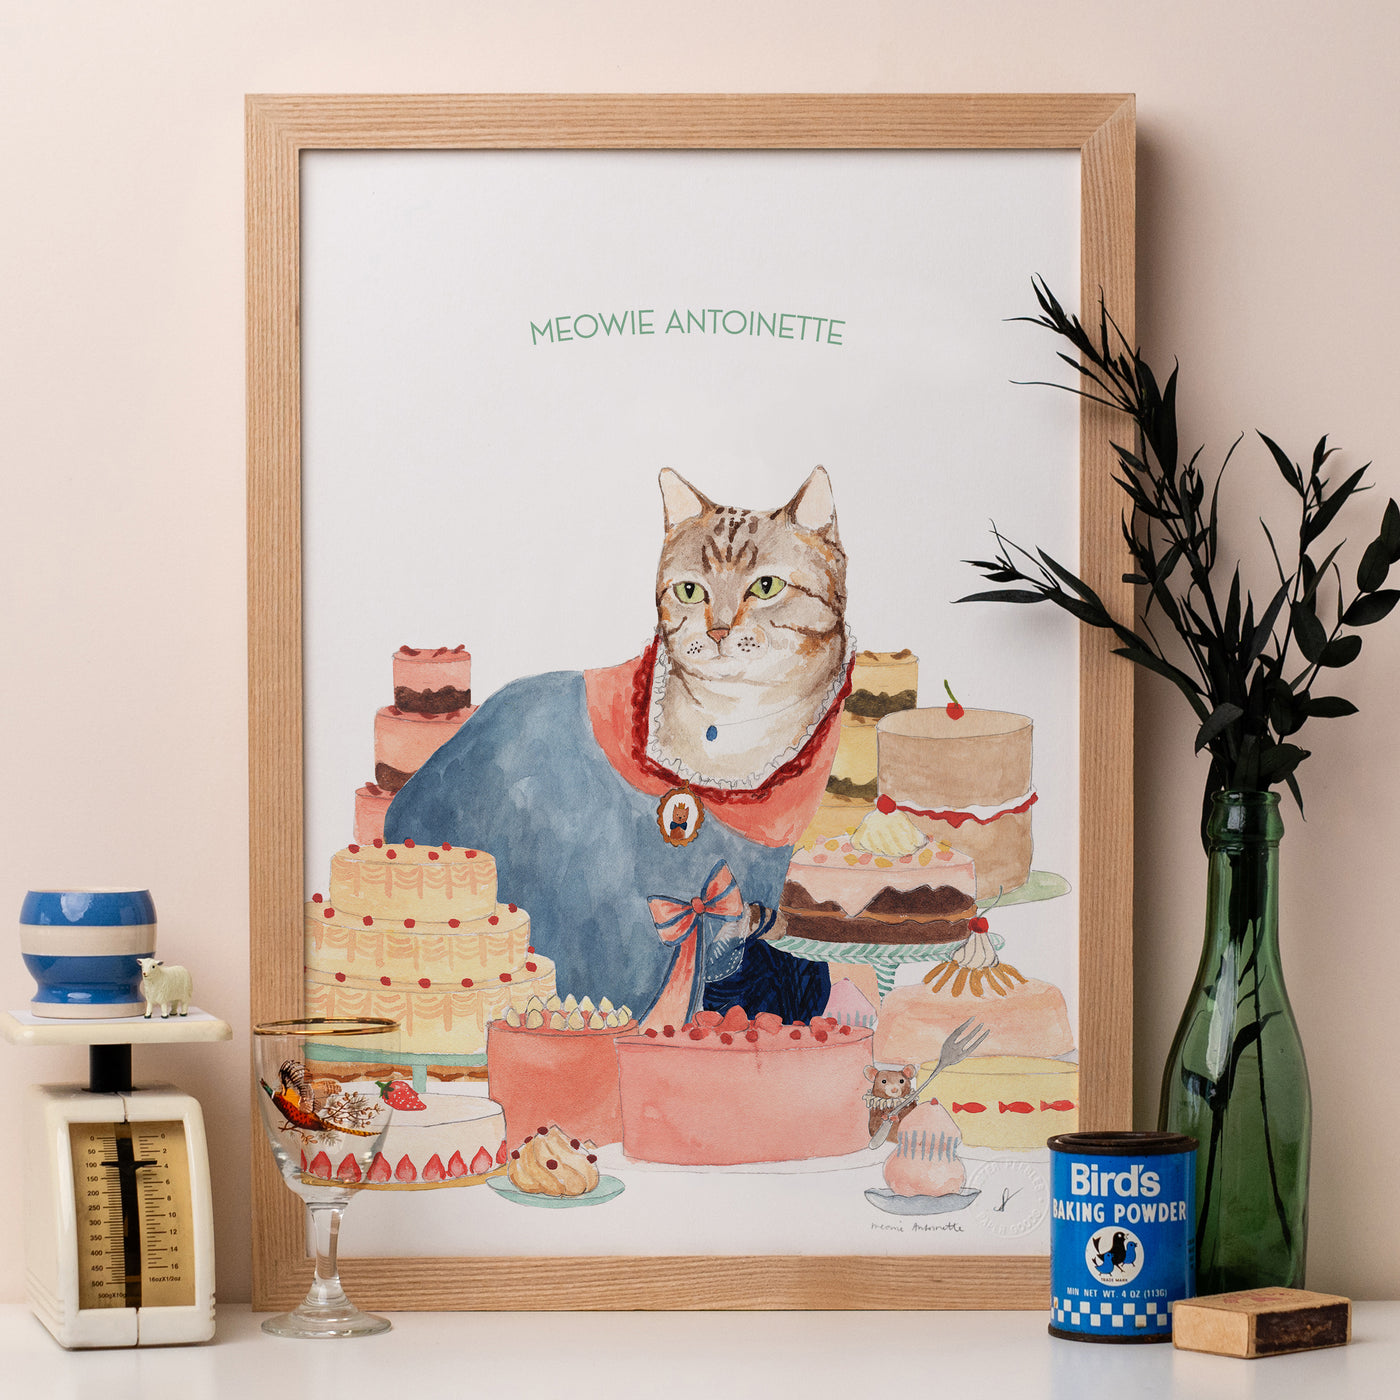 Meowie Antionette Print